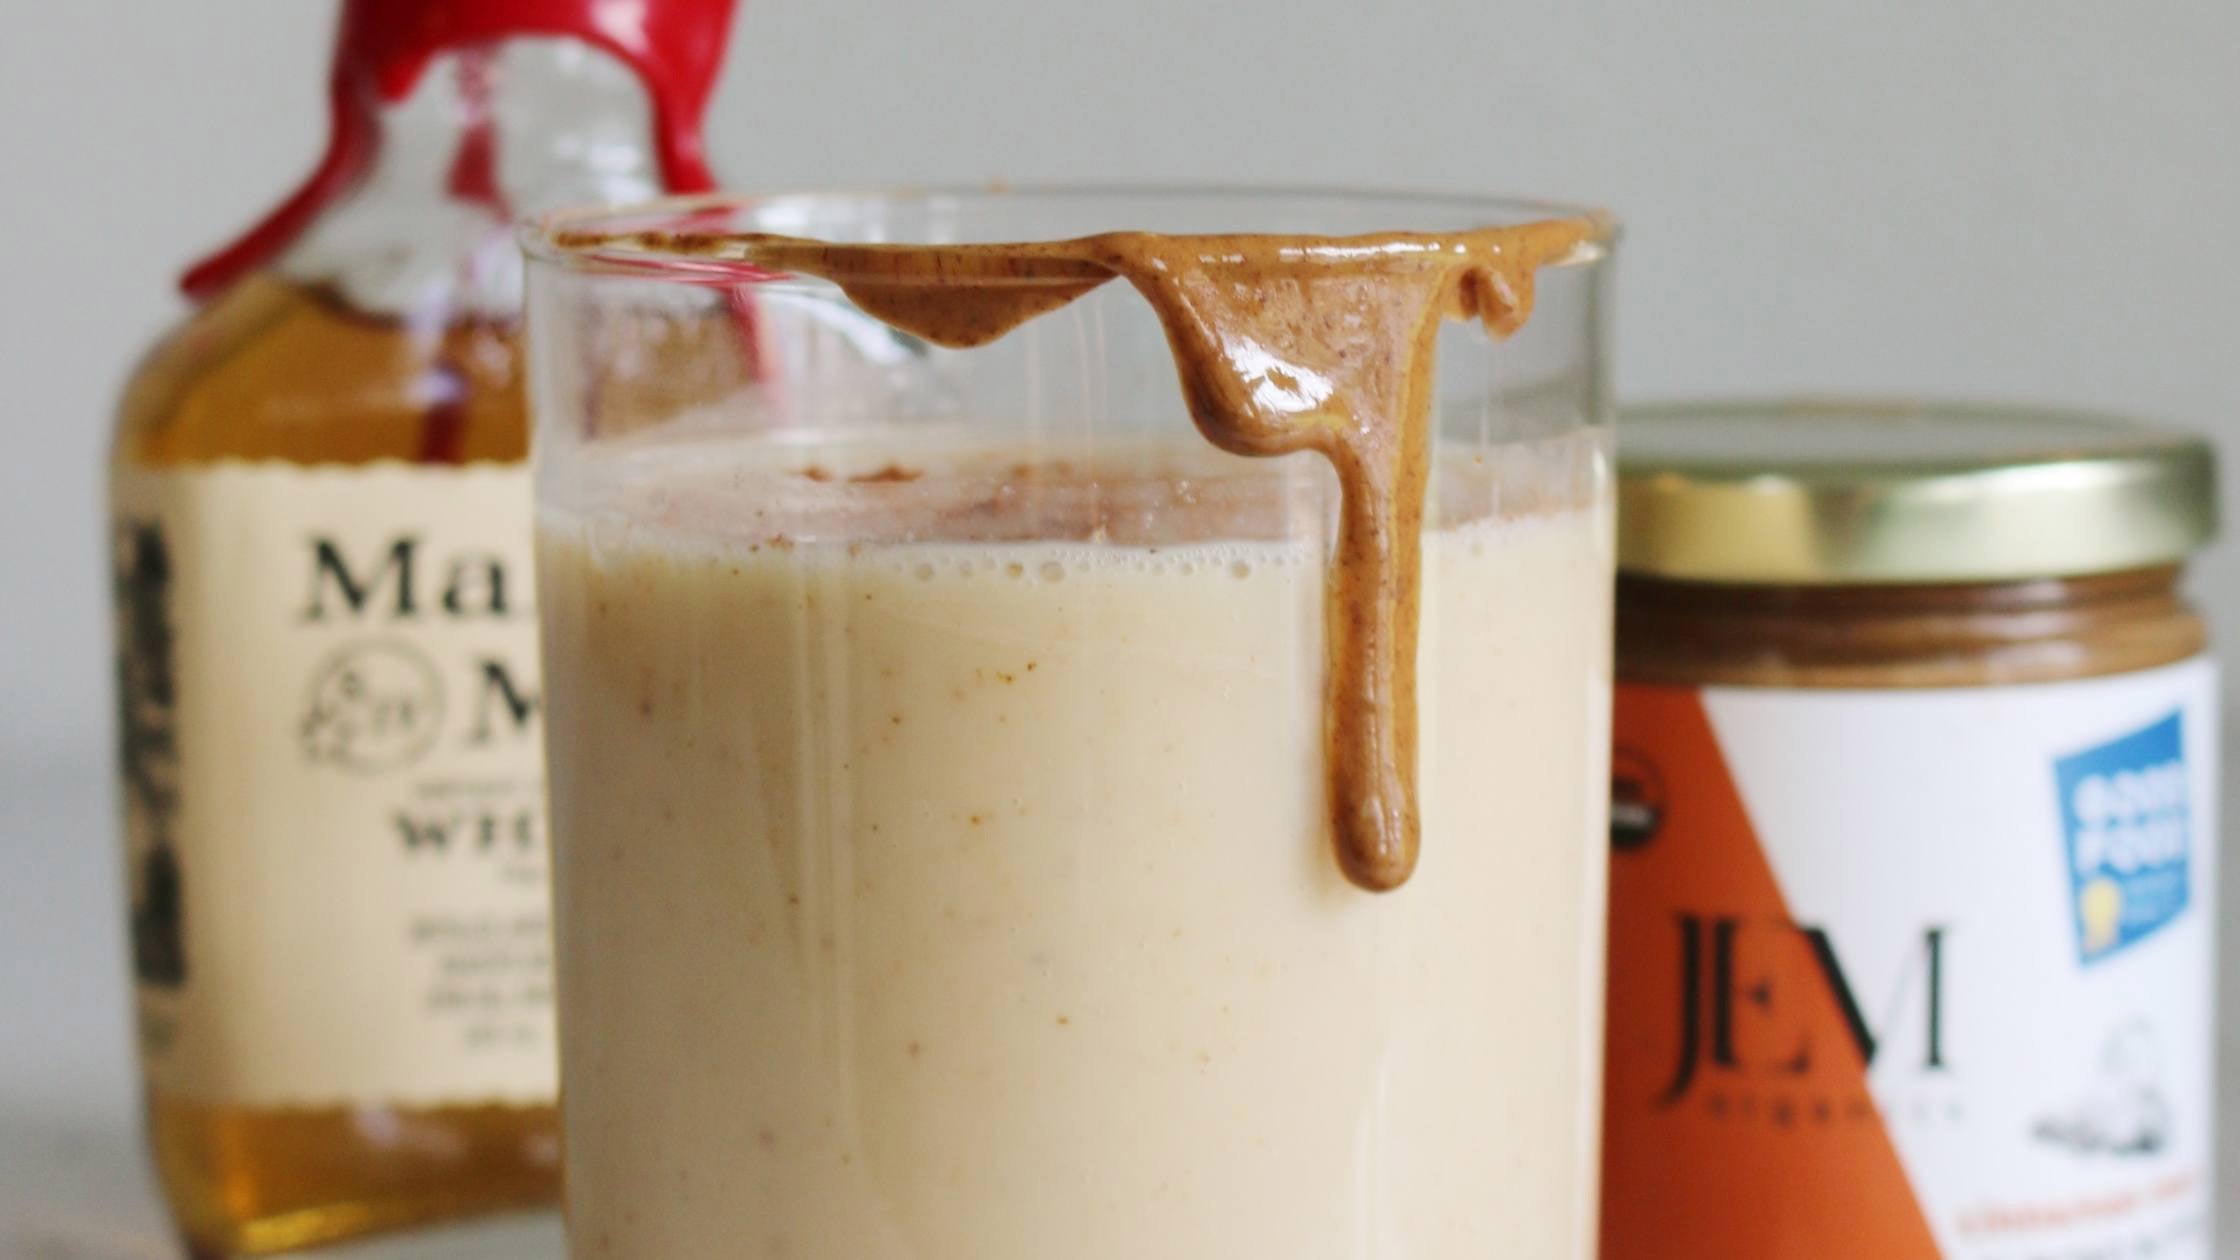 Glass of eggnog with JEM Organics nut butter jar and a bottle of Maker's Mark whiskey